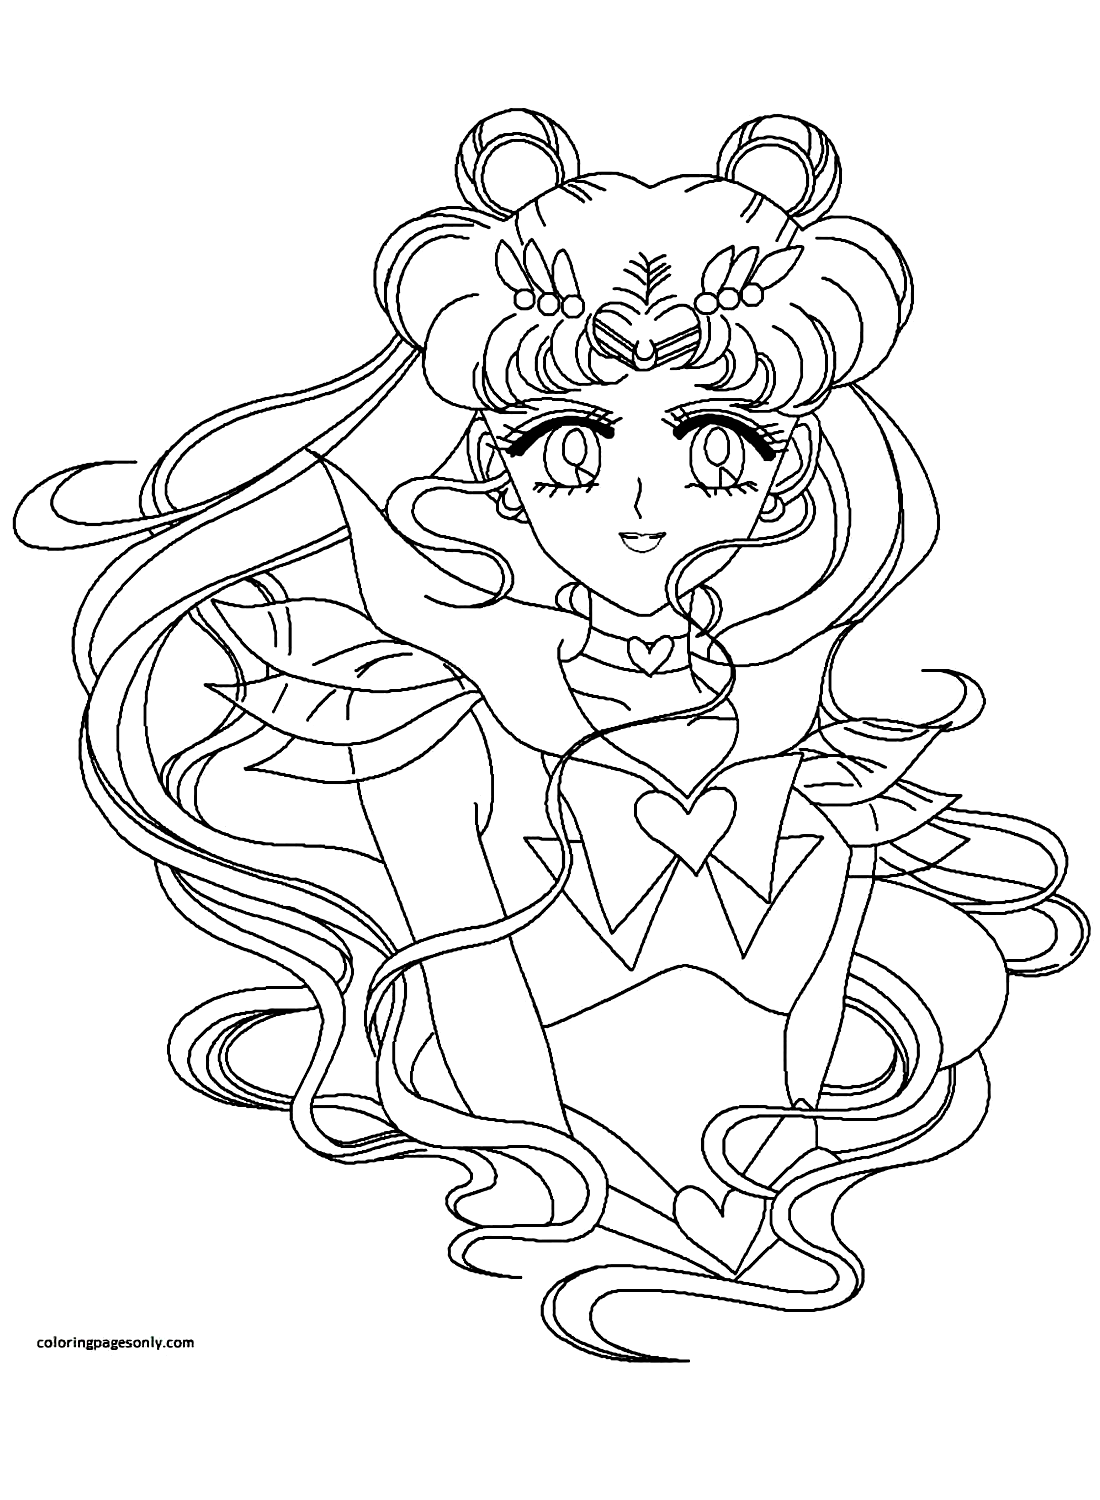 Sailor Moon 12 Coloring Page